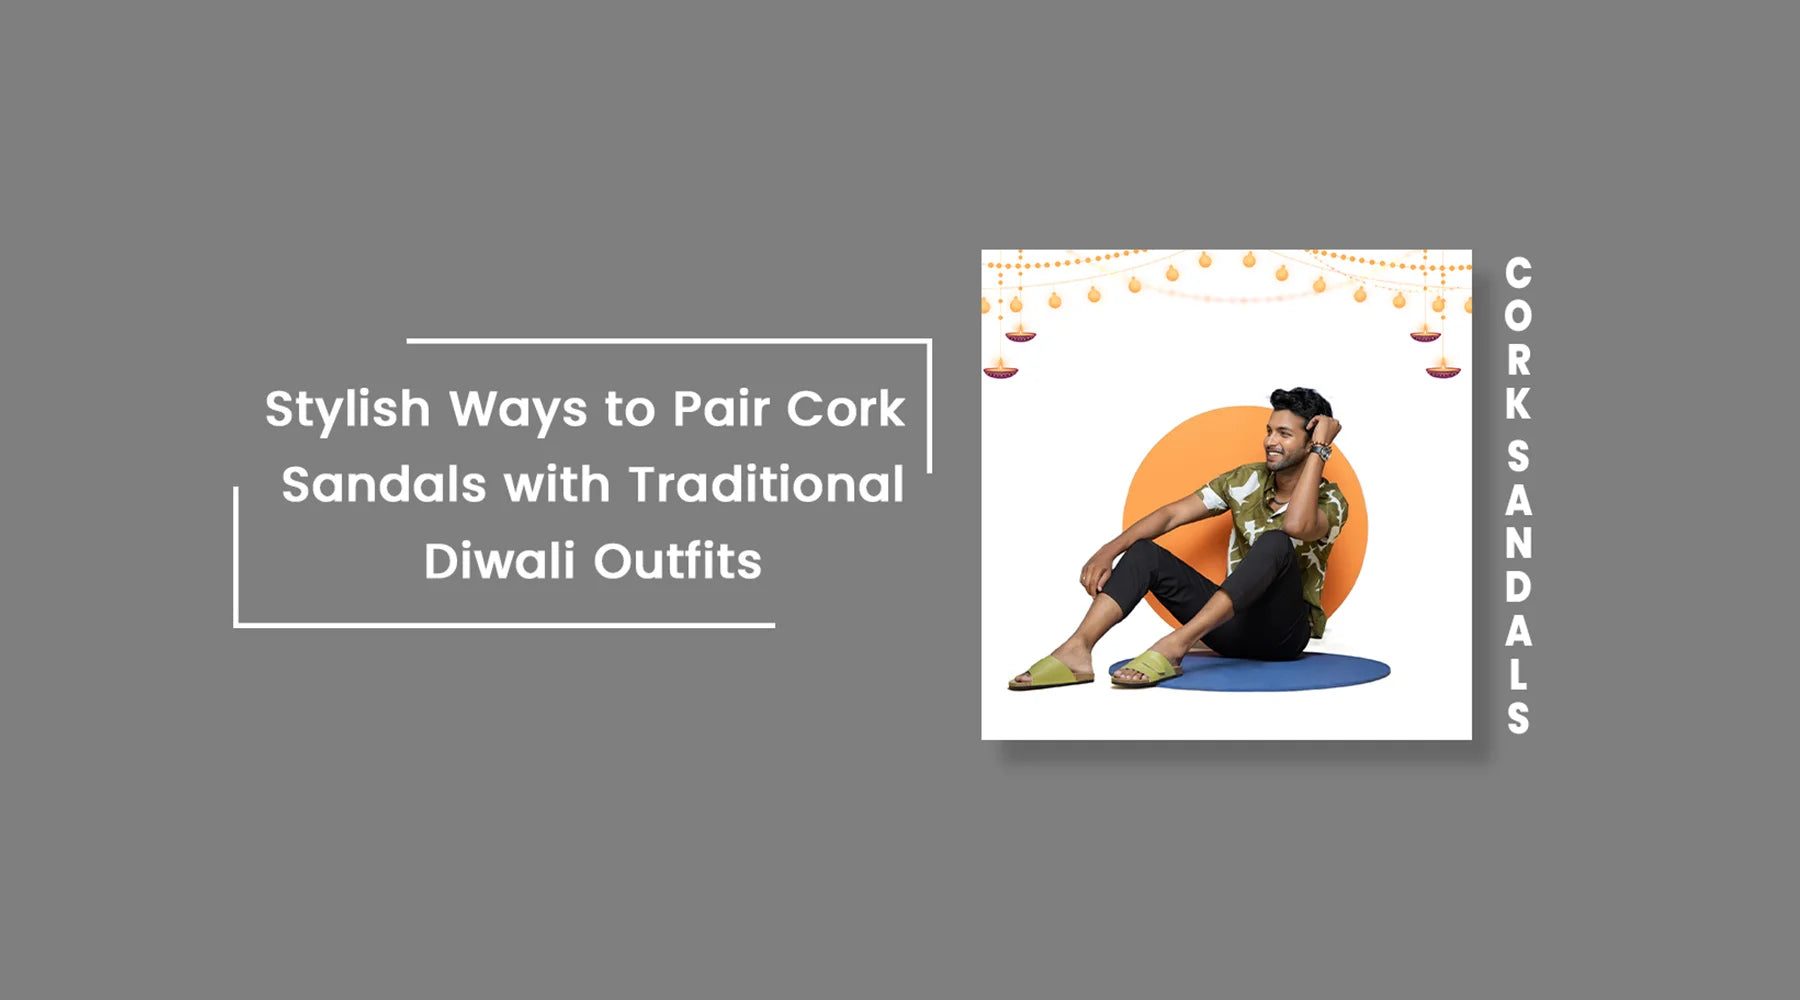 Stylish Ways to Pair Cork Sandals with Traditional Diwali Outfits